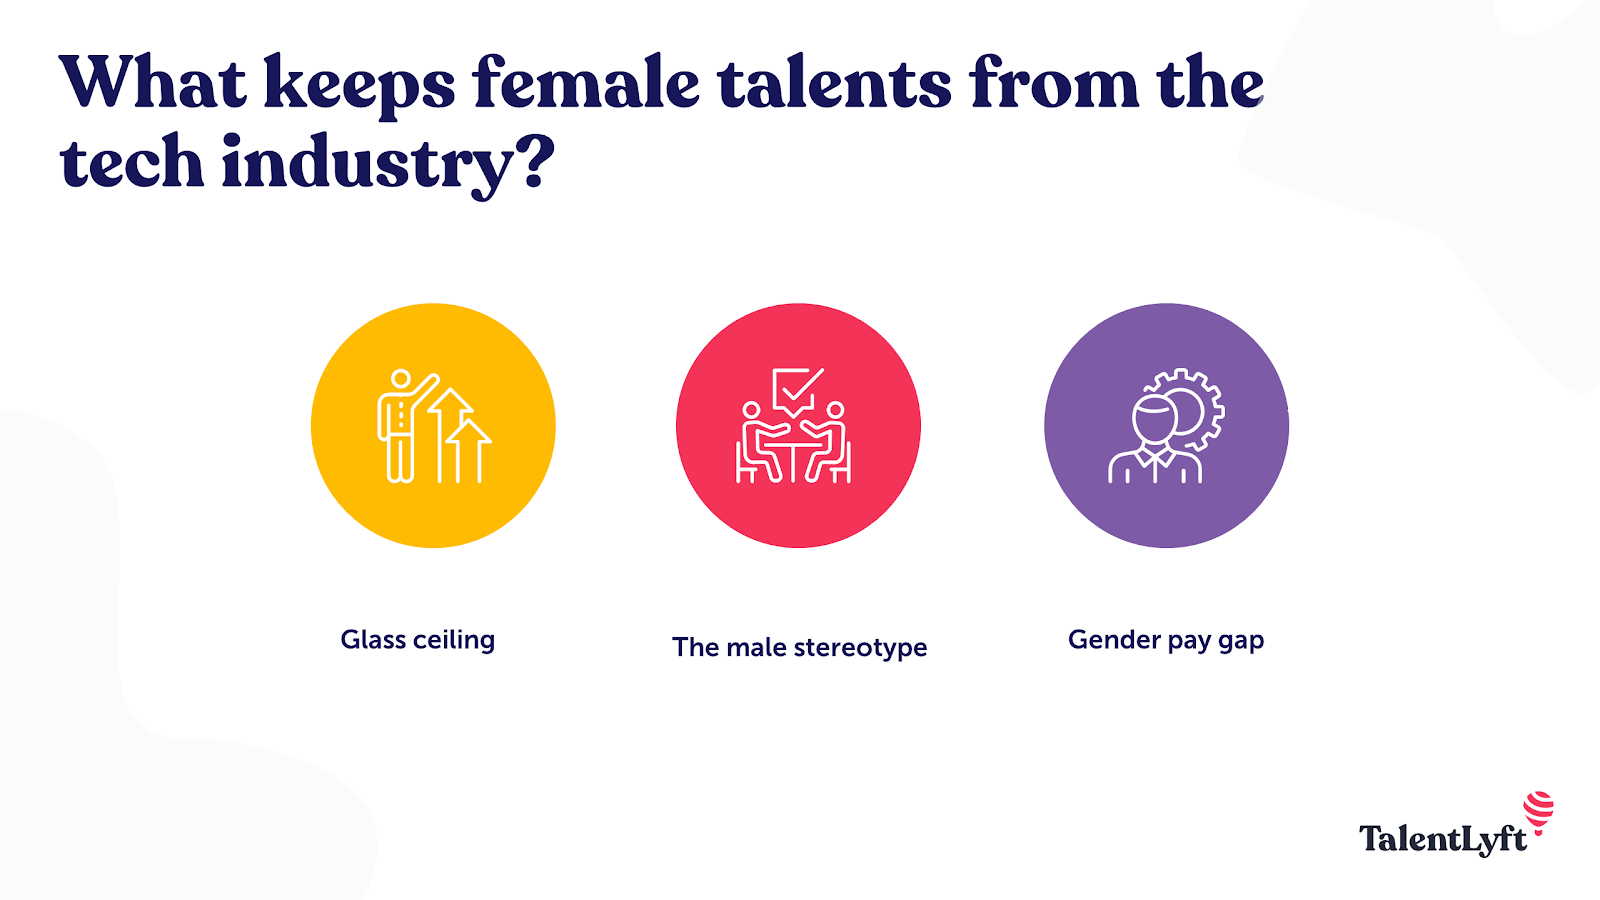 What keeps female talents from the tech industry